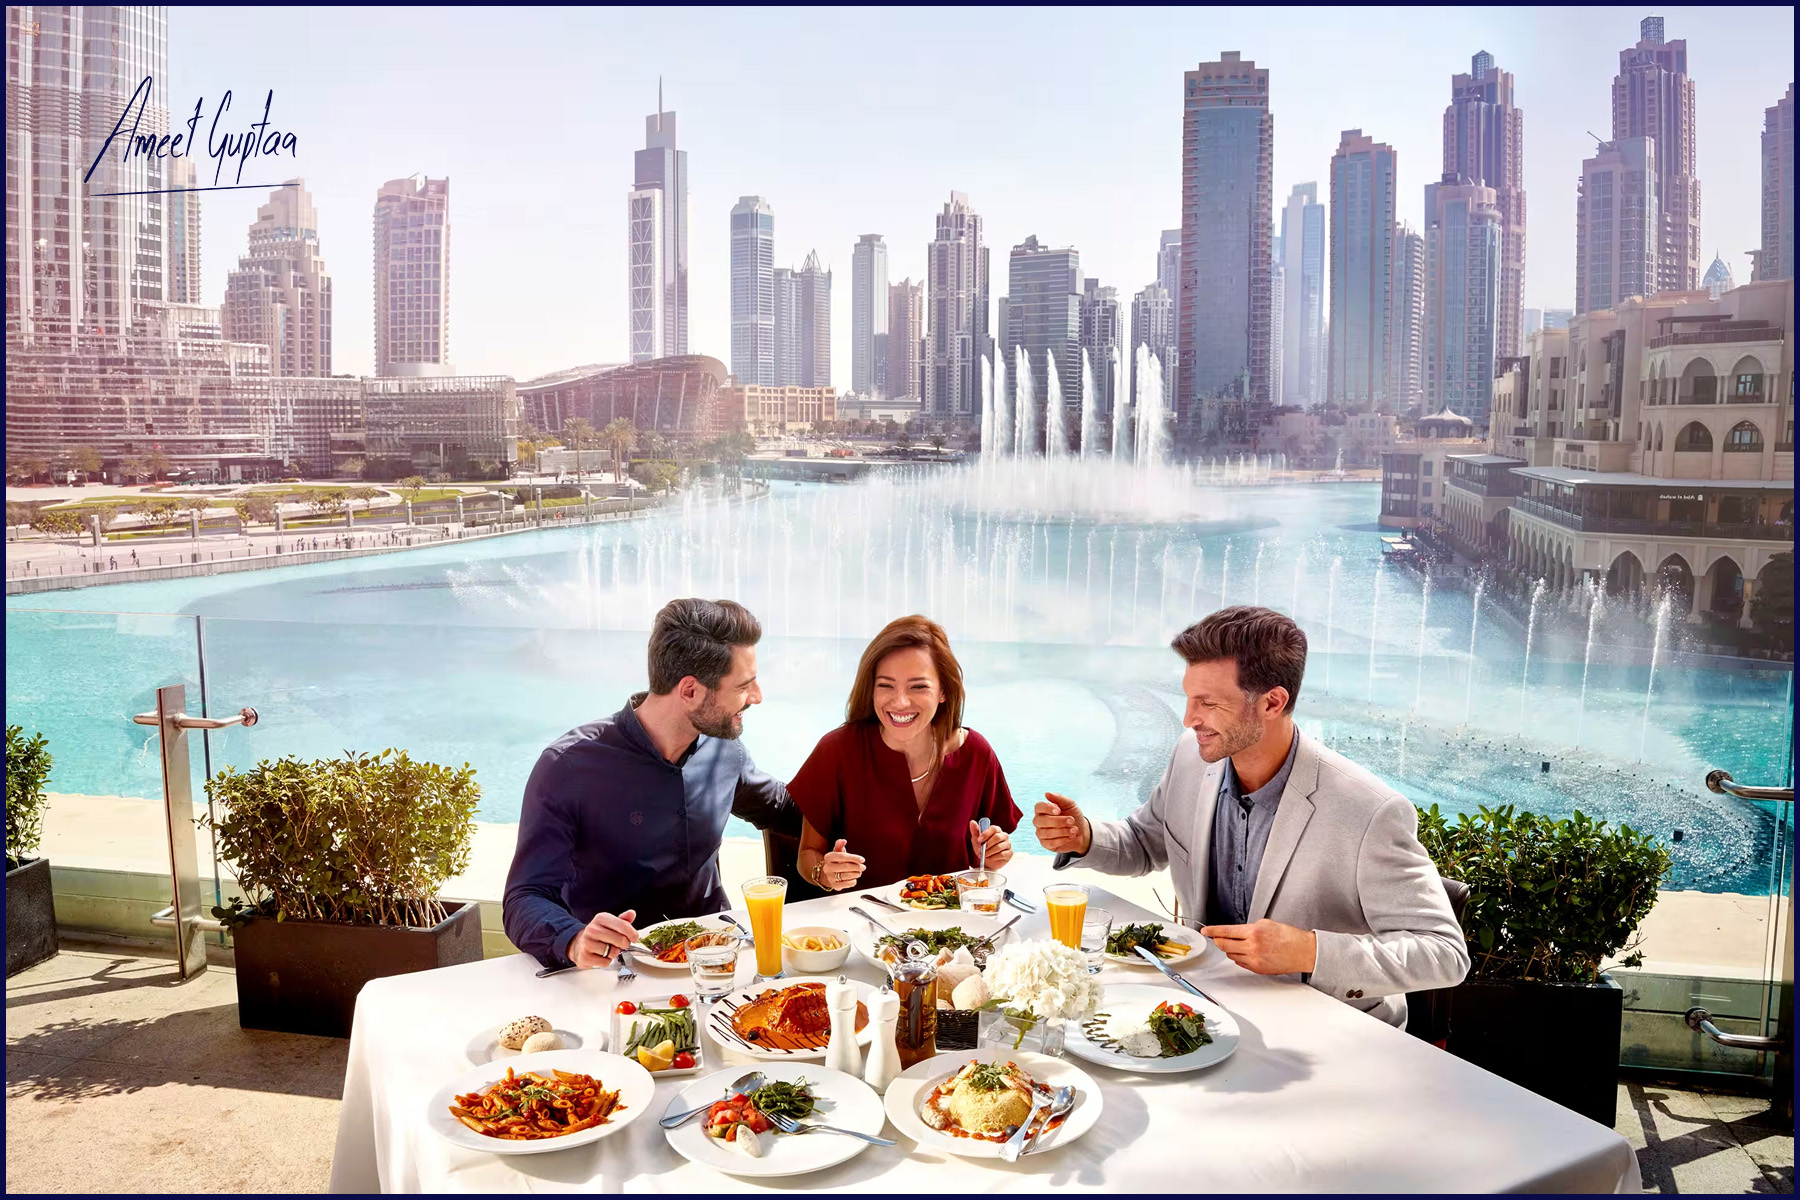 10 Marketing Tips to Boost Your Restaurant Business in Dubai